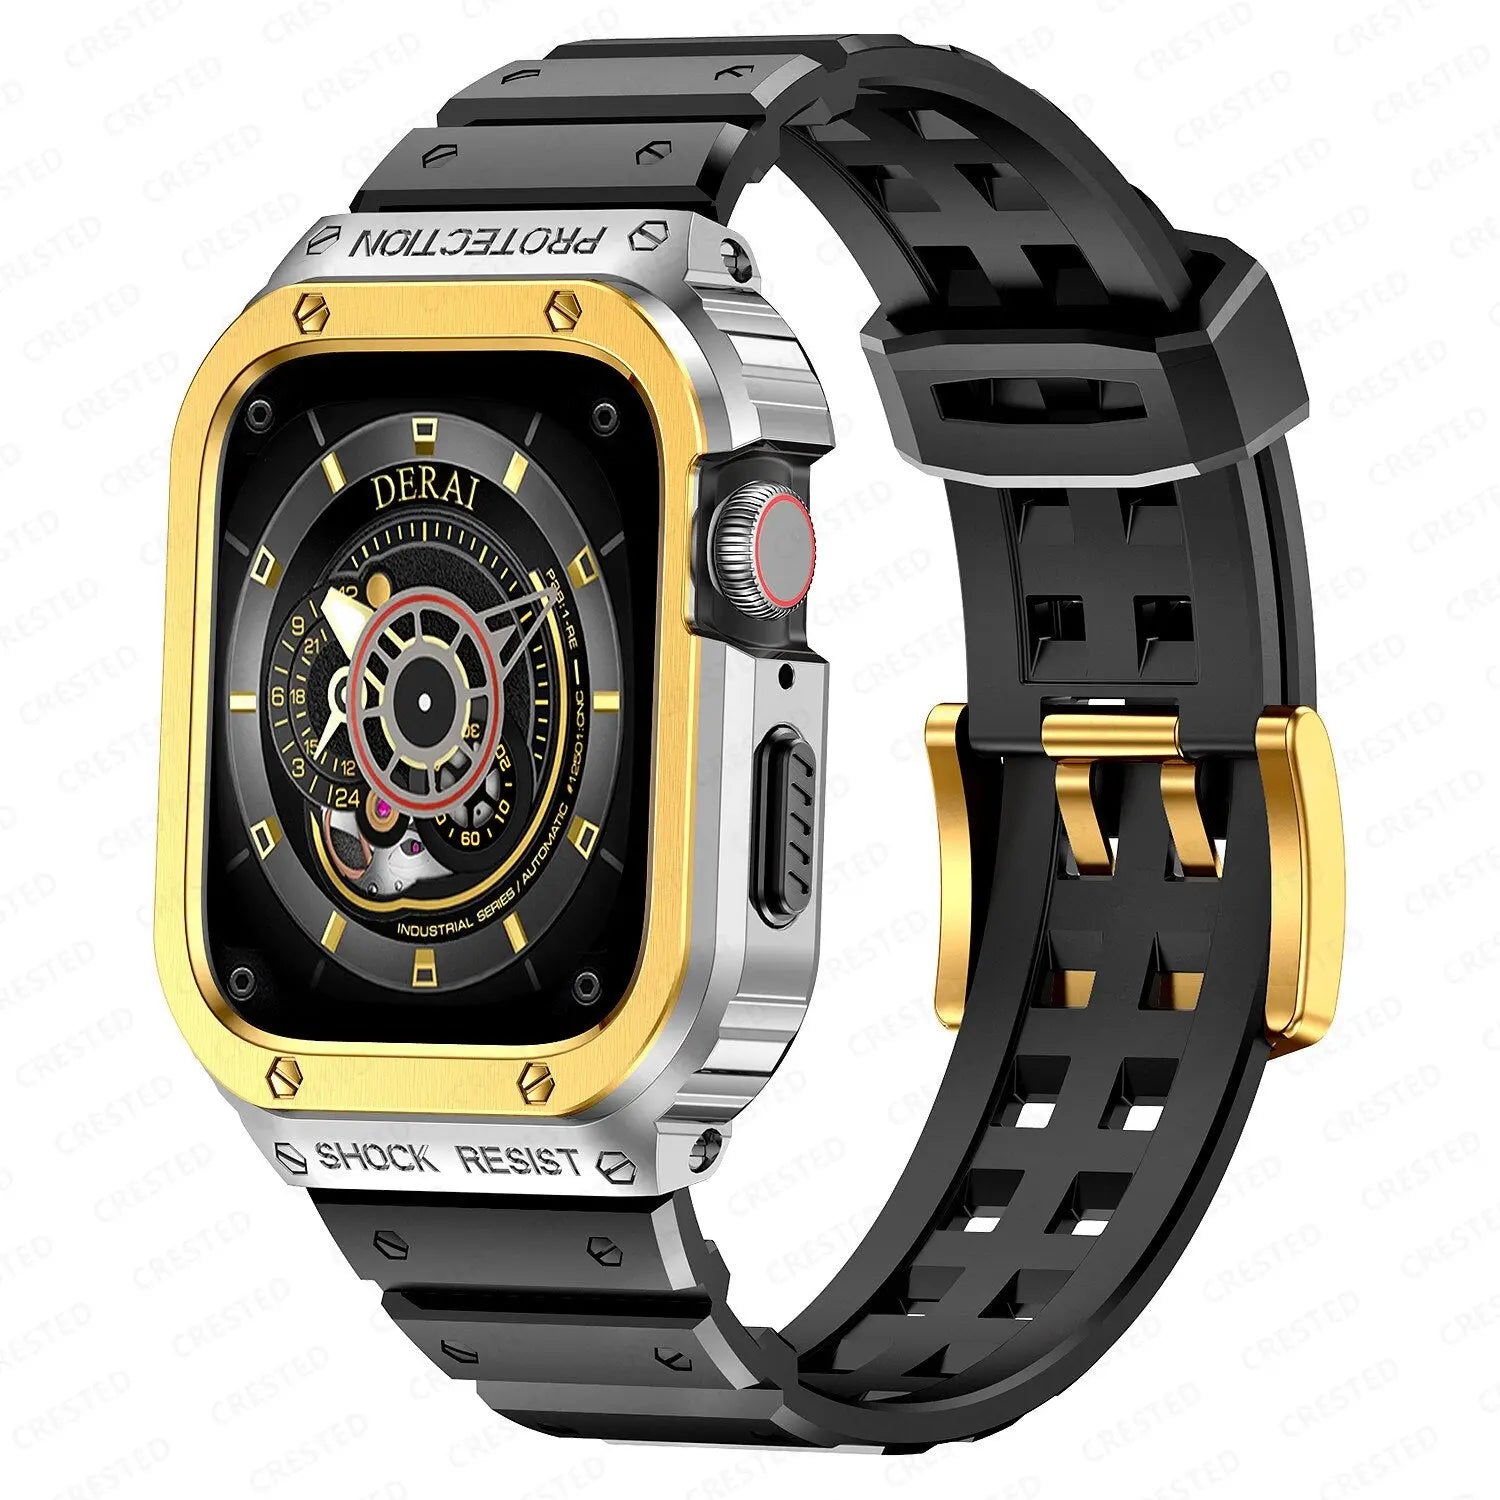 Luxury Band And Case For Apple Watch - Pinnacle Luxuries